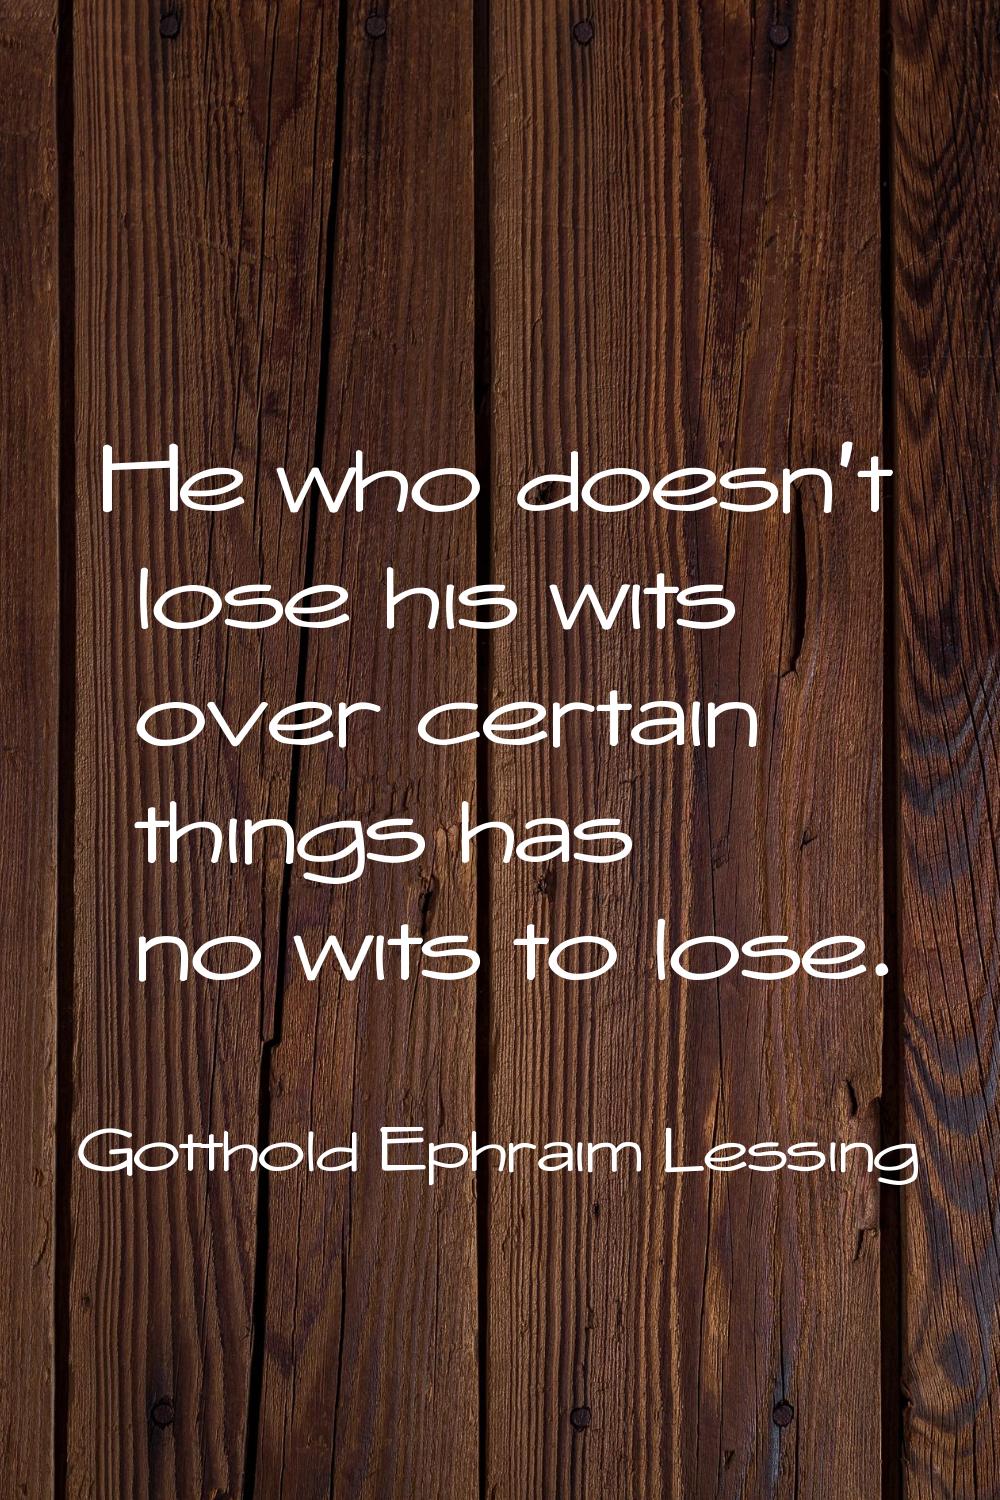 He who doesn't lose his wits over certain things has no wits to lose.